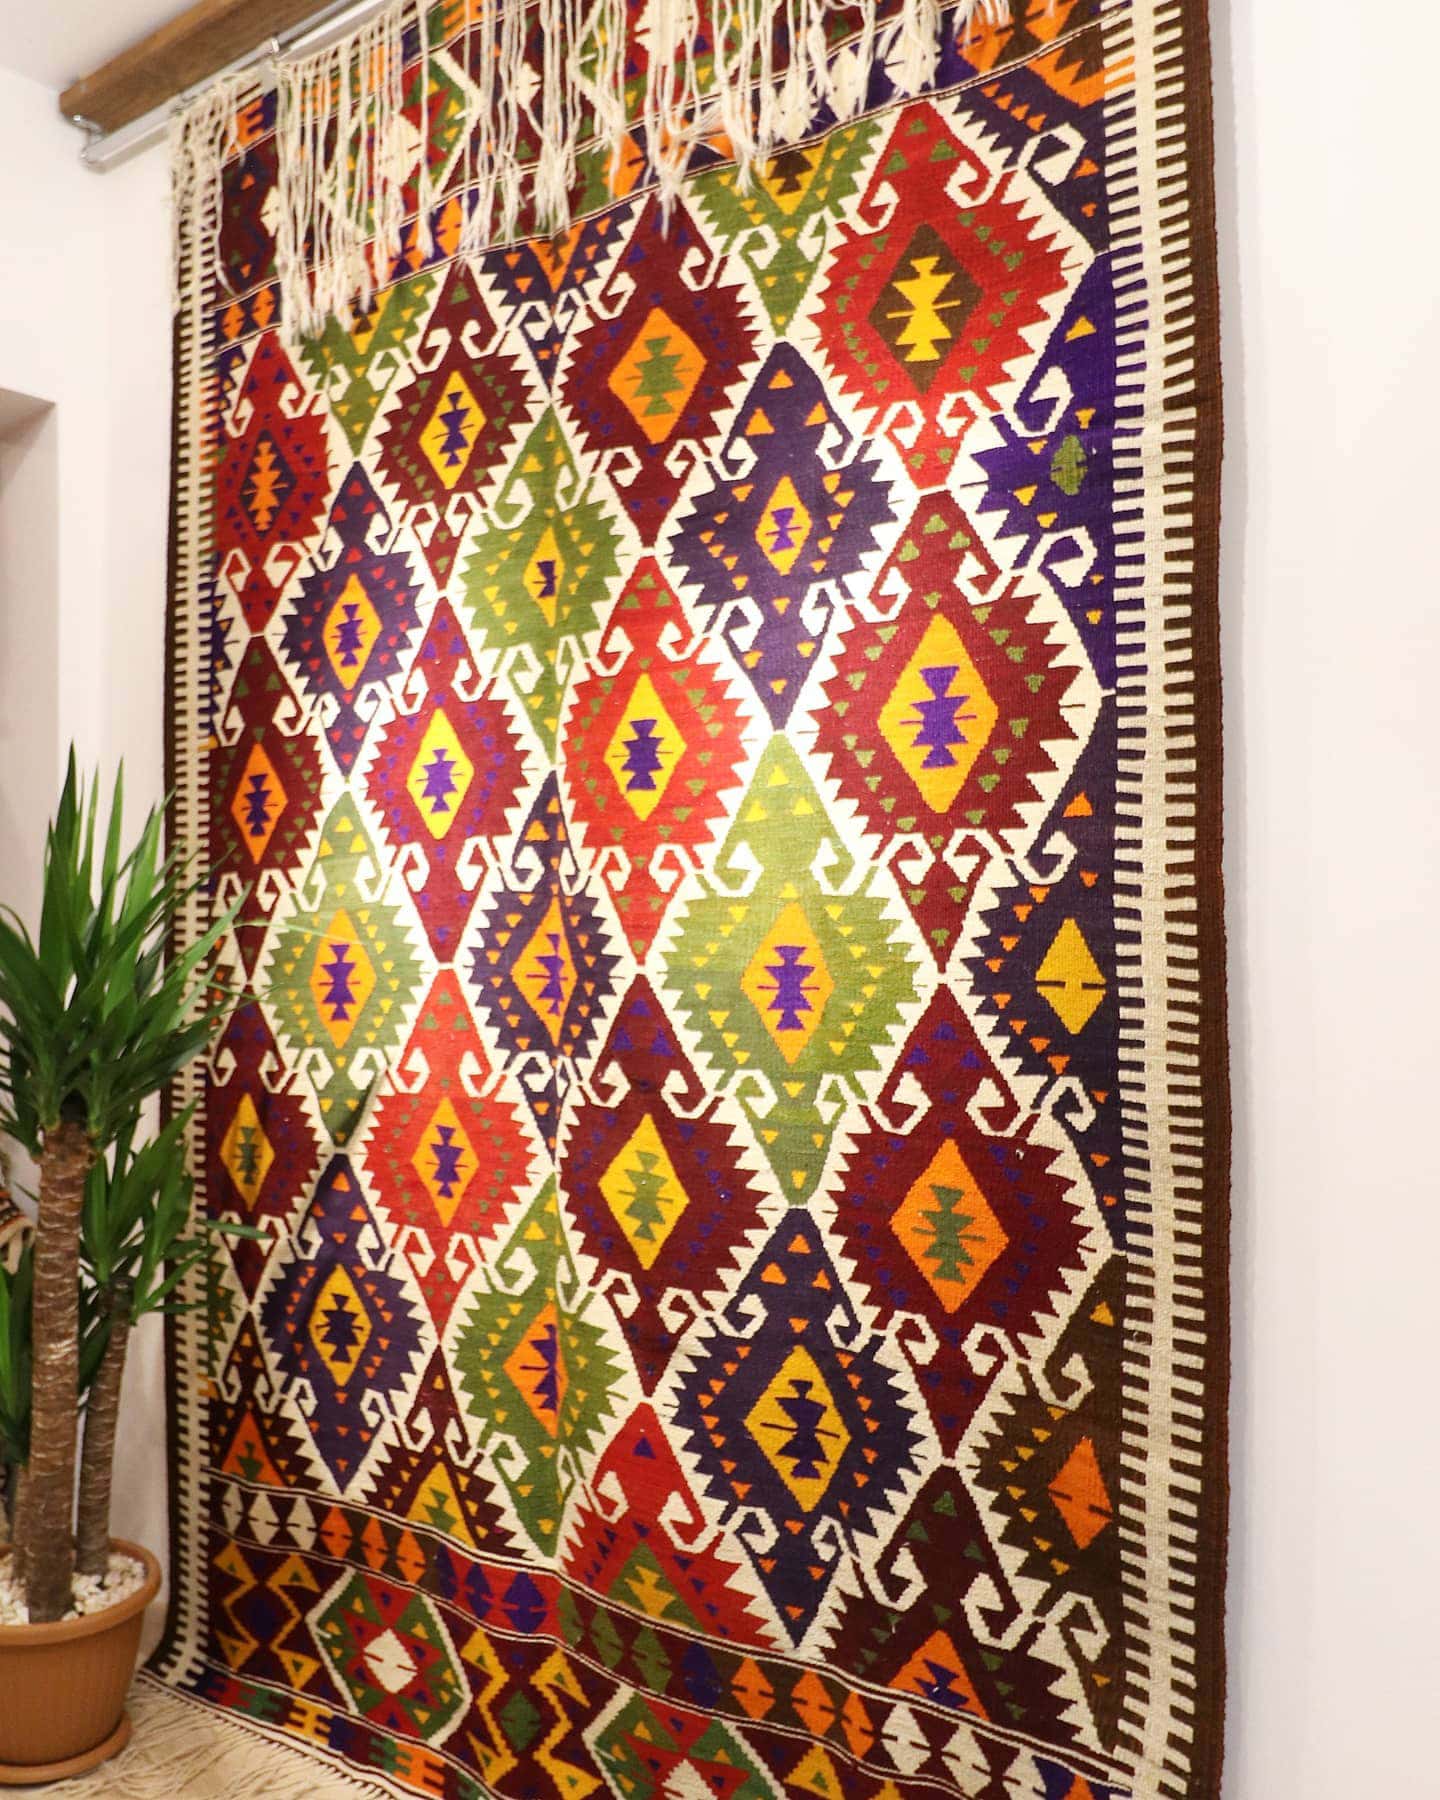 a luxury nomadic handwoven vintage Turkish kilim rug from Antalya in rustic earth tones and tribal motifs